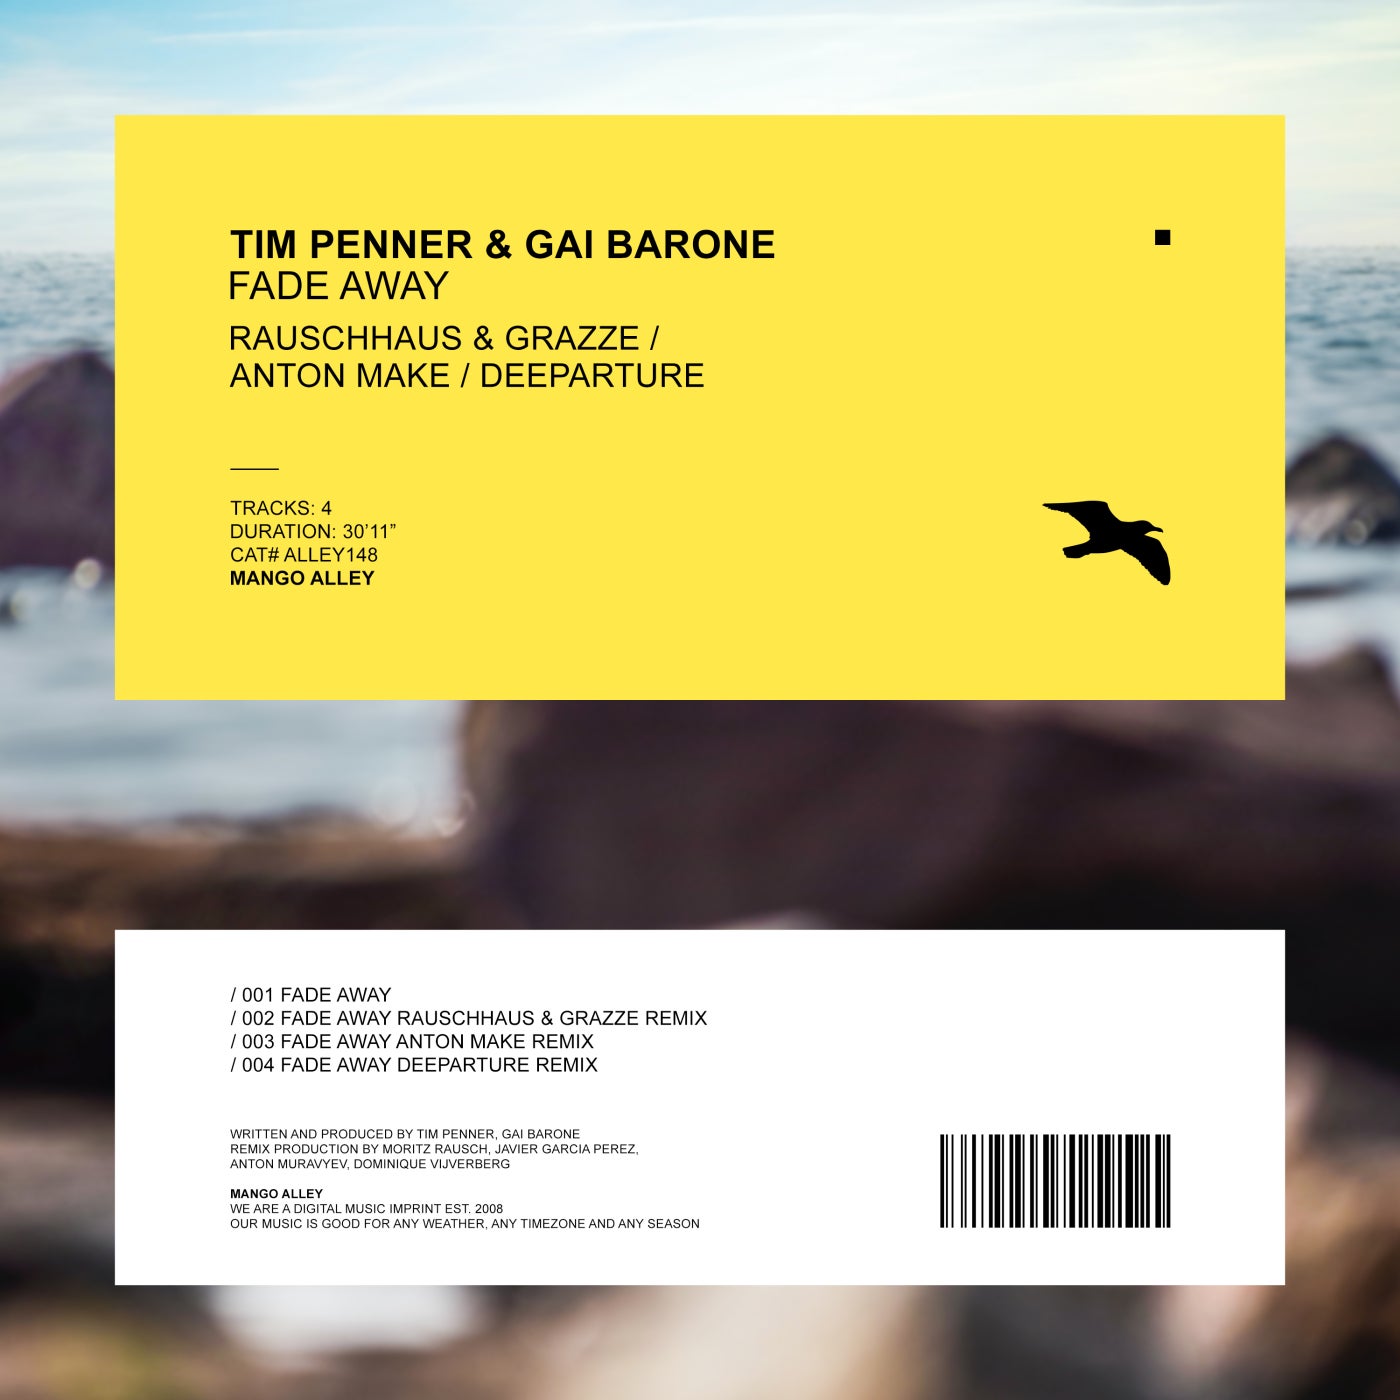 Tim Penner And Gai Barone - Fade Away (rauschhaus And Grazze Remix) on Revolution Radio